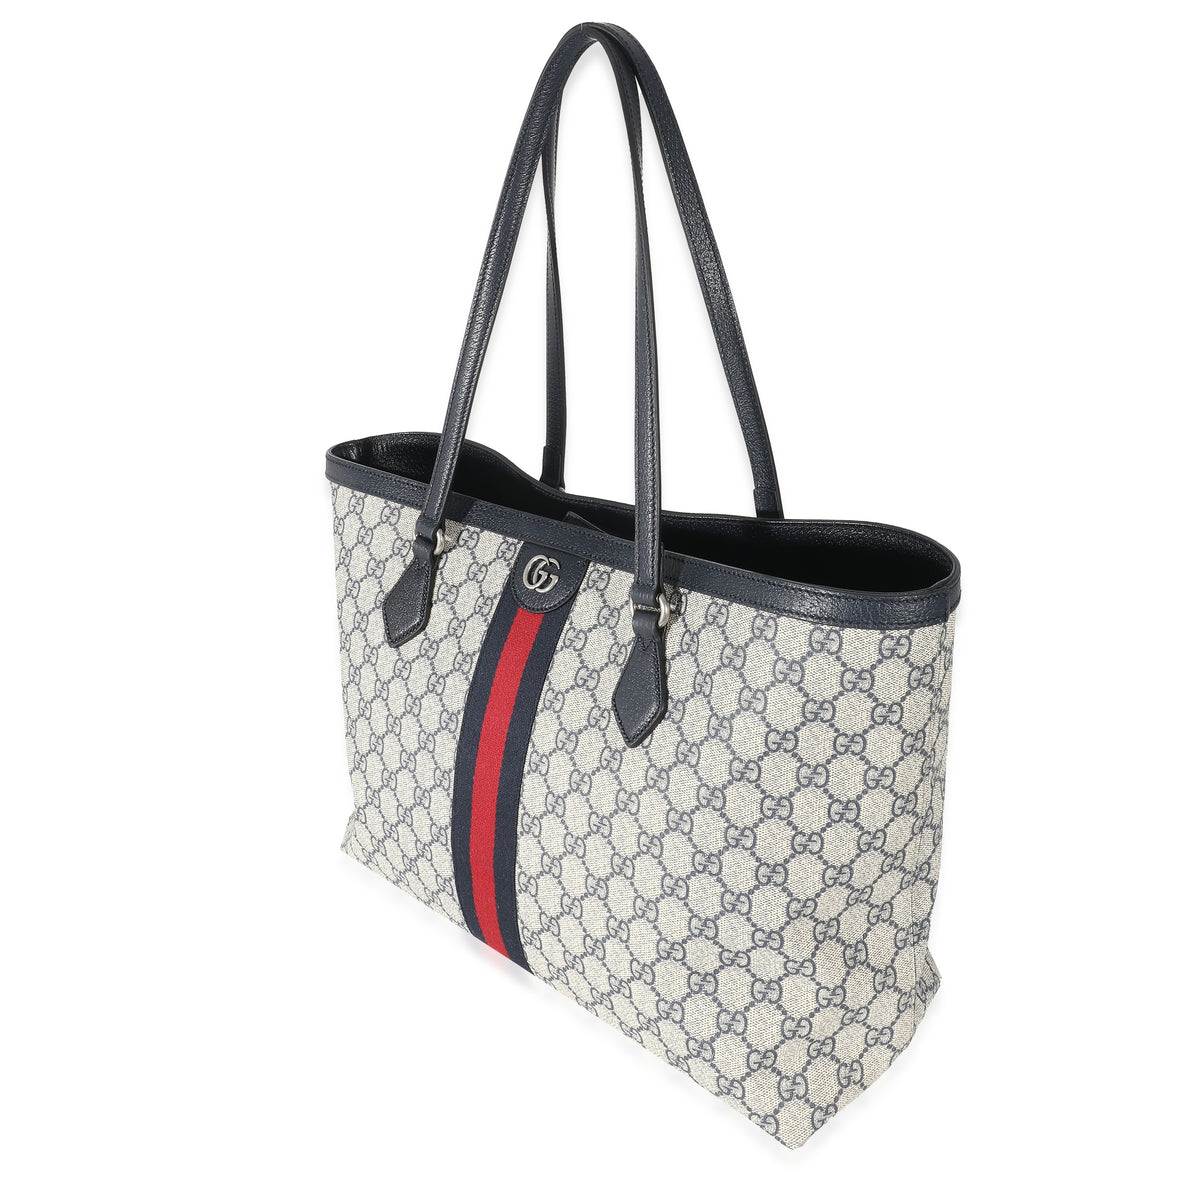 Ophidia GG medium tote in beige and white canvas